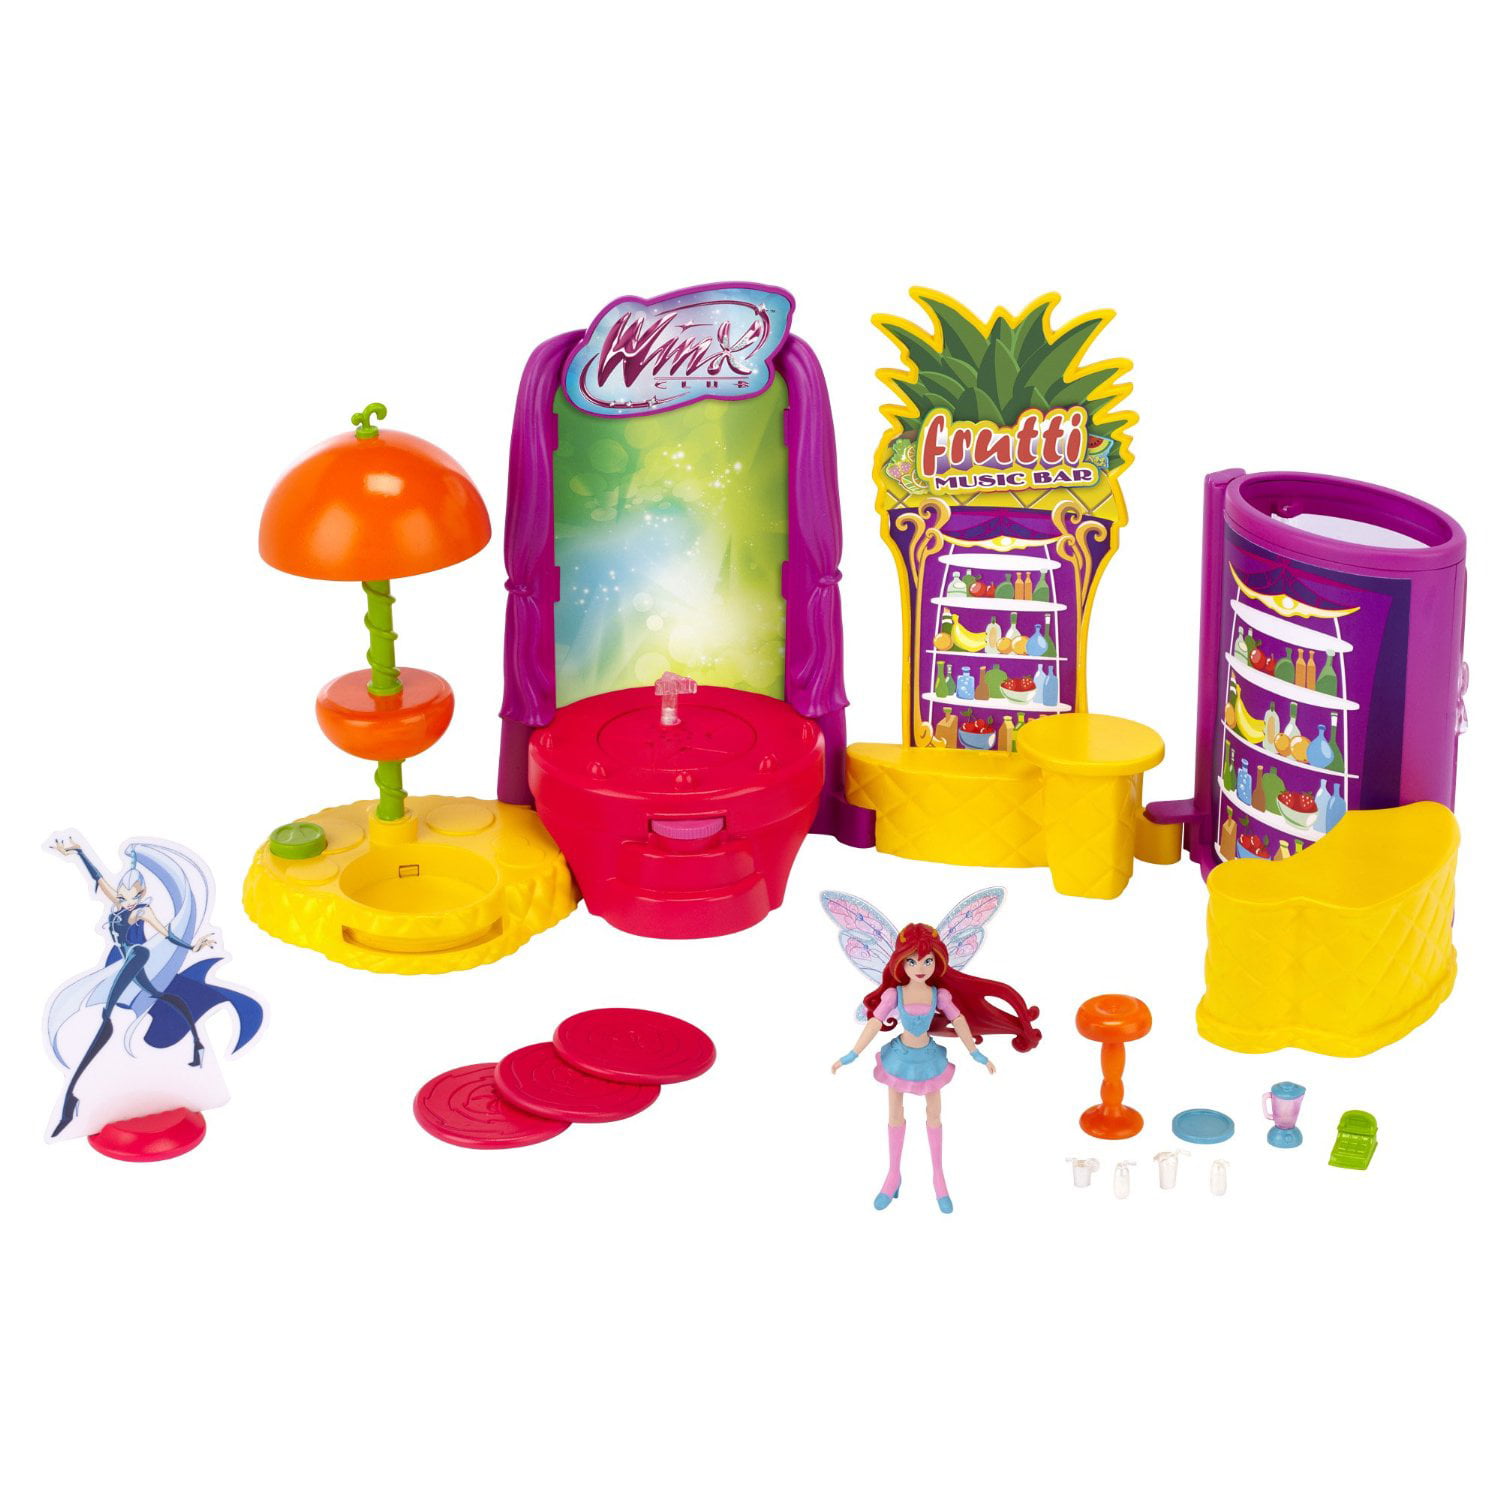 Jakks Pacific Winx Club Frutti Music Bar 4-in-1 Playset Contains Music & Sounds 